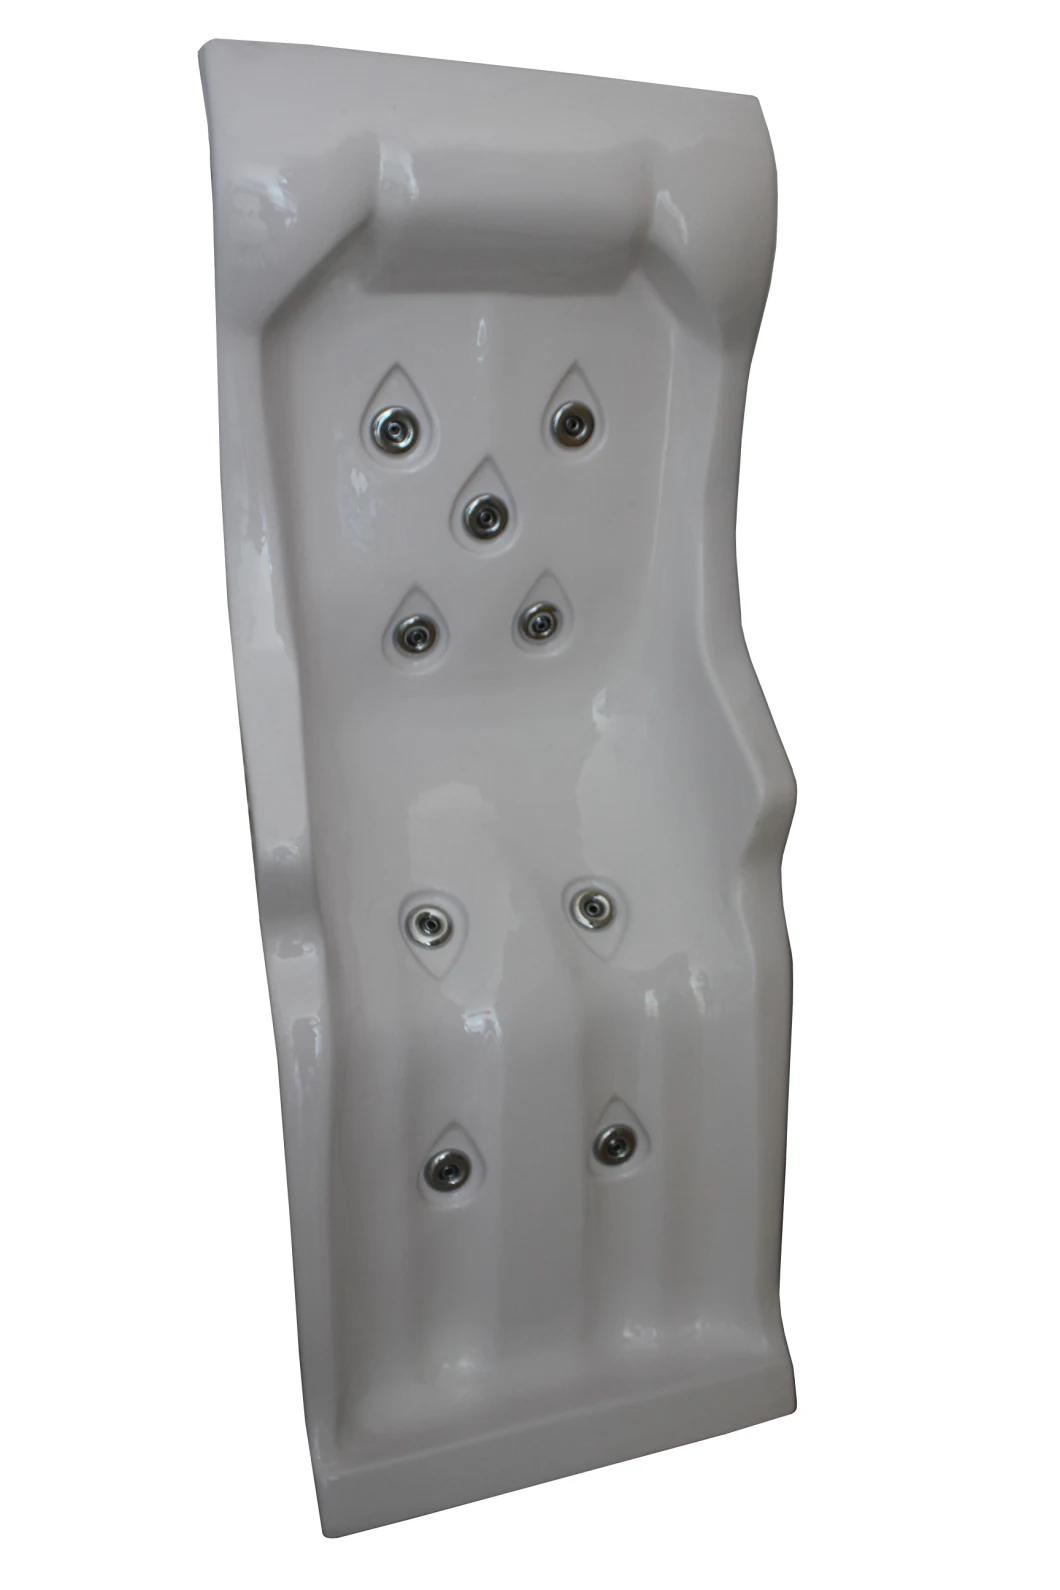 Acrylic SPA Hydrotherapy Water Jet Massage Bed